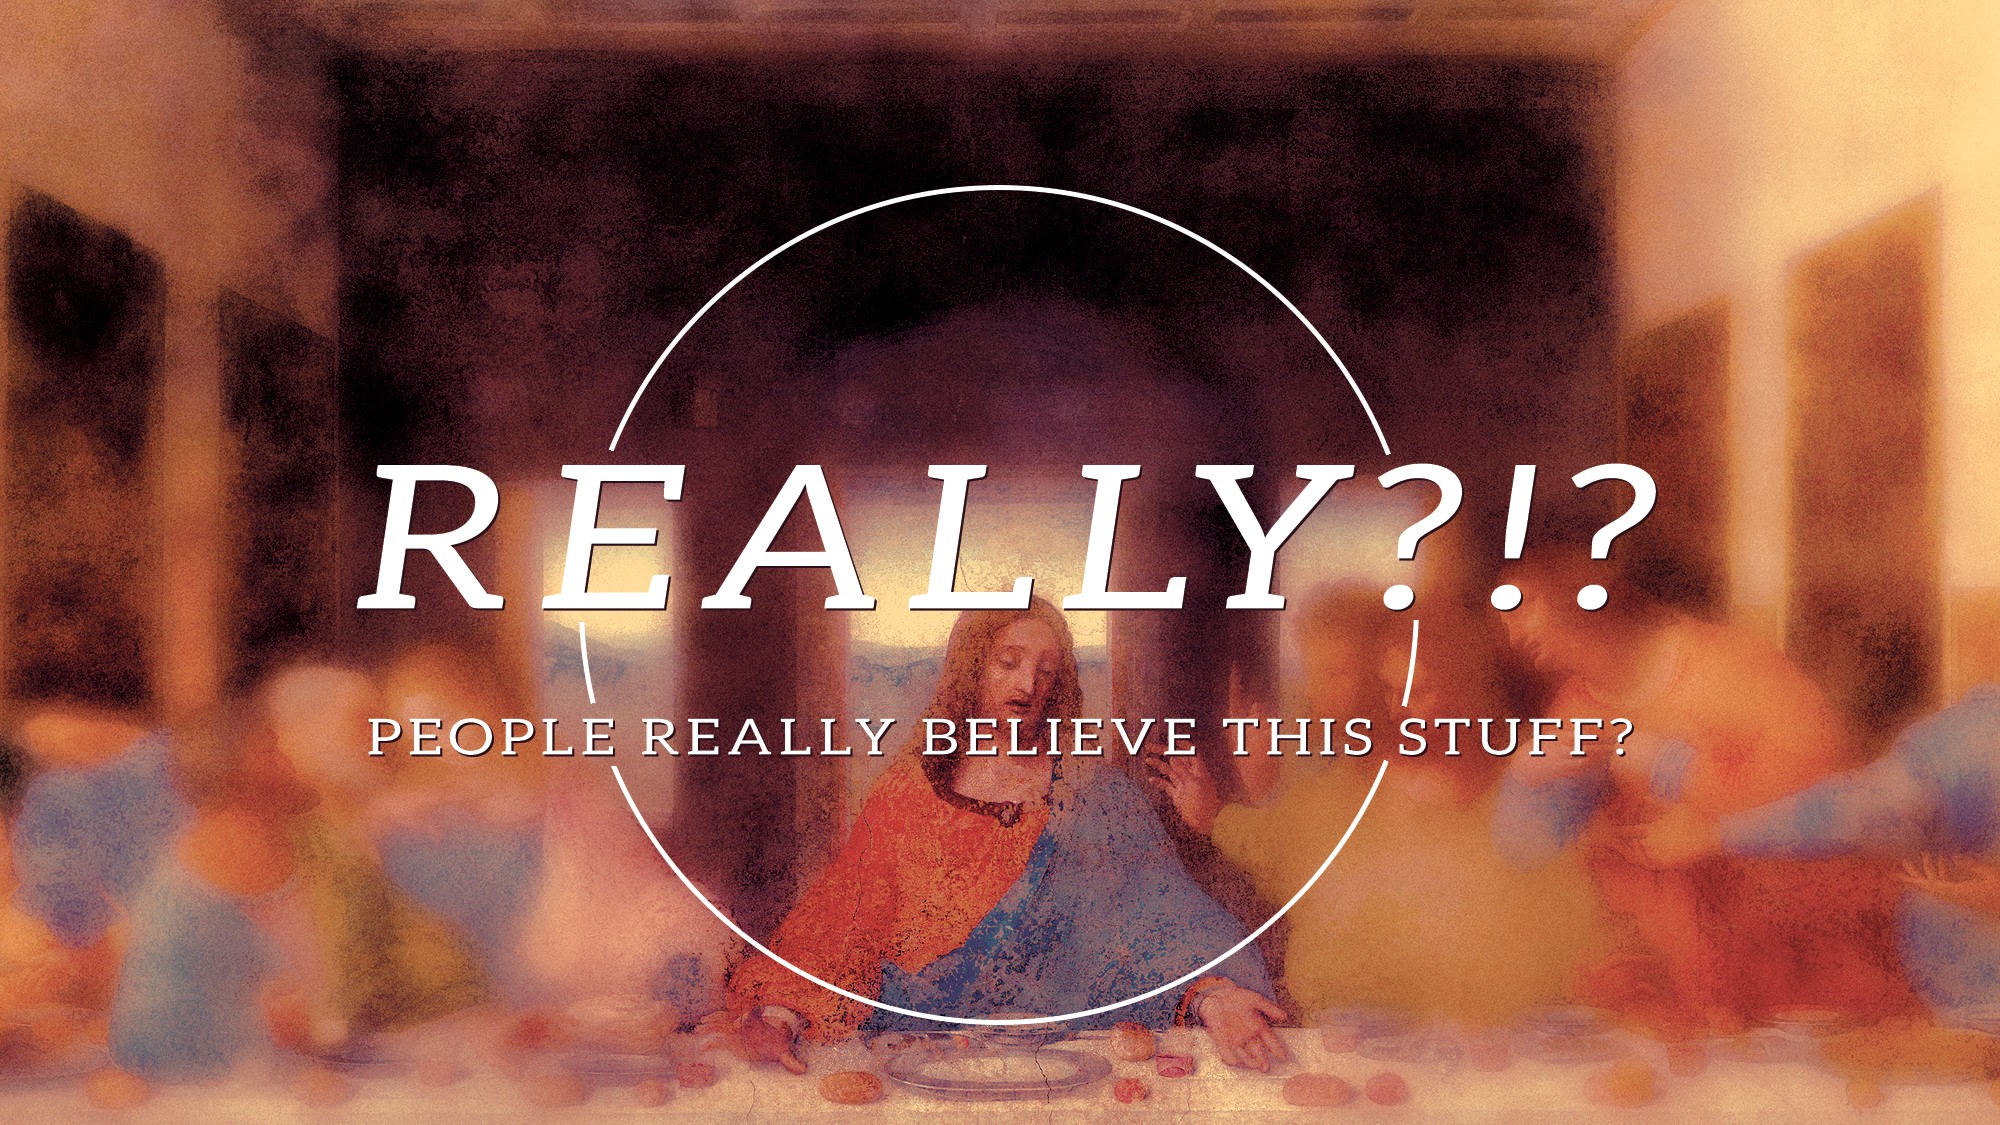 Really?!?: The Quest for the Real Jesus